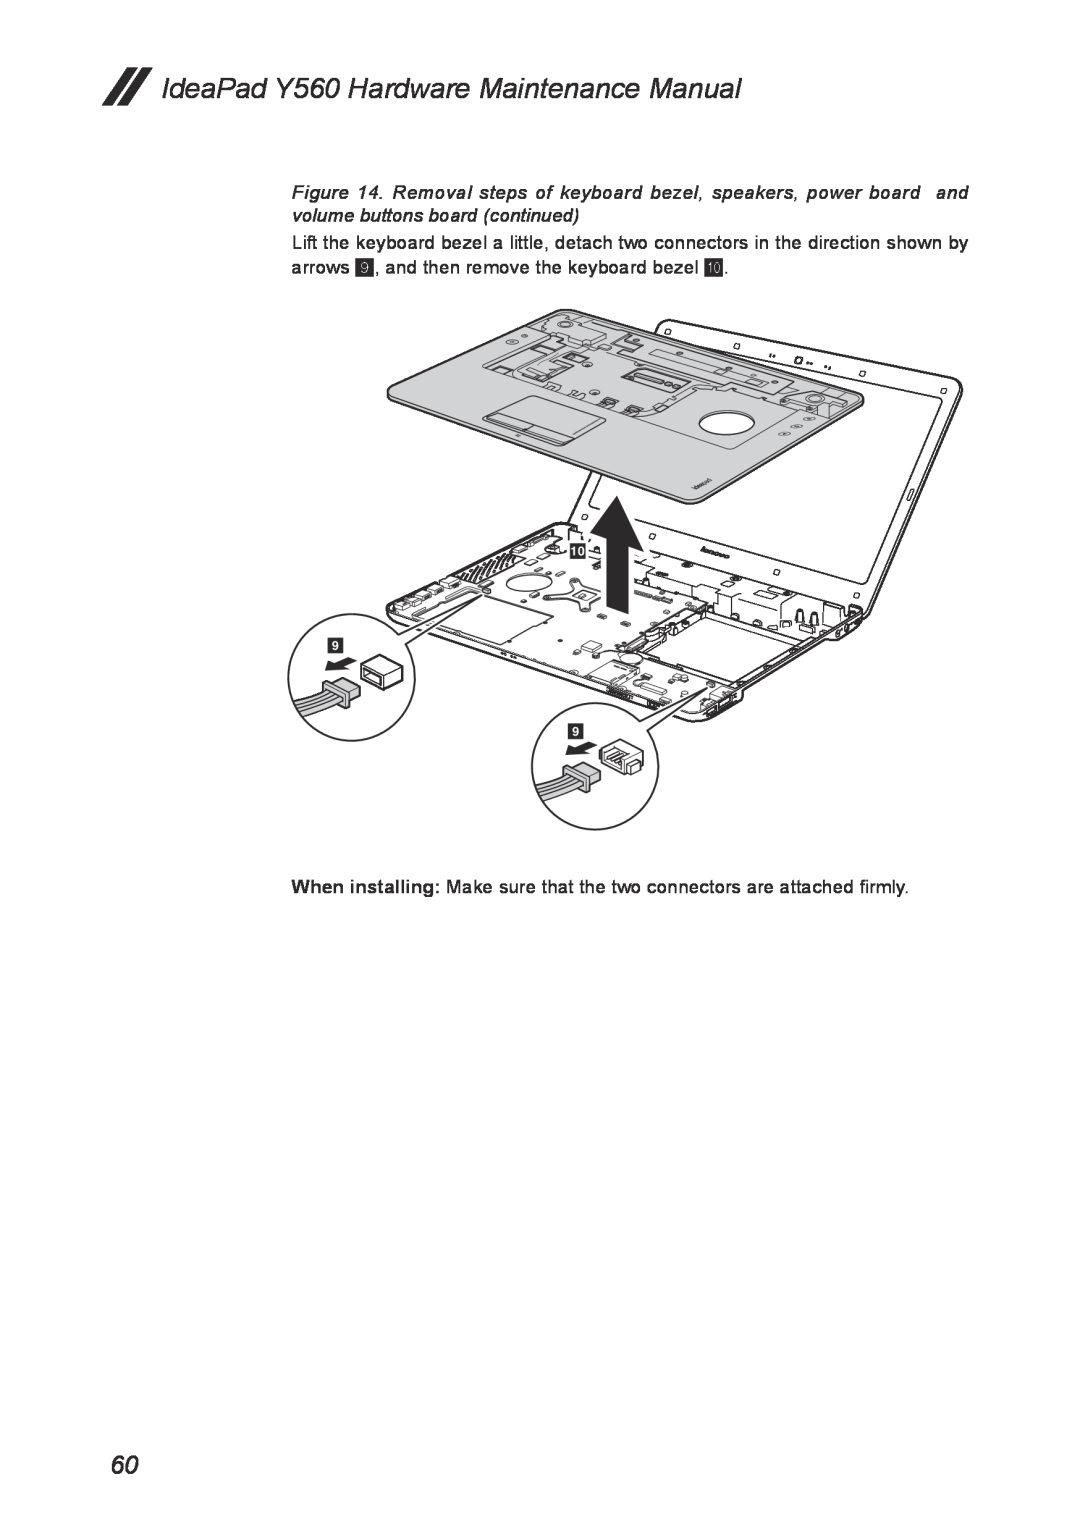 Lenovo IdeaPad Y560 Hardware Maintenance Manual, When installing Make sure that the two connectors are attached firmly 